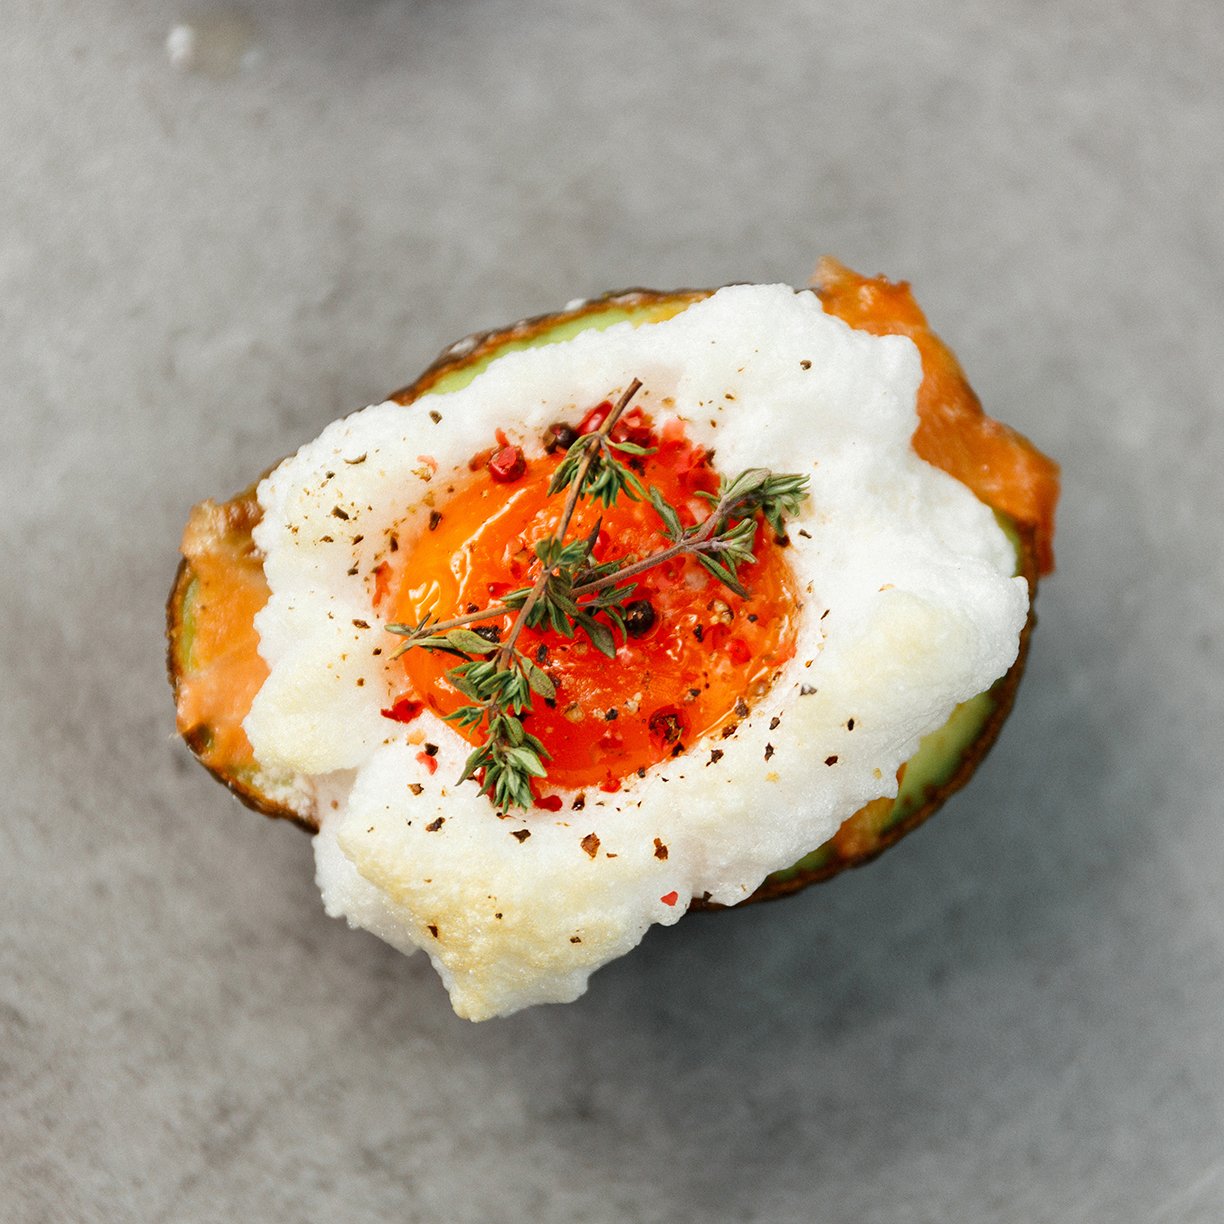 Stuffed Avocados with Salmon Devil Eggs